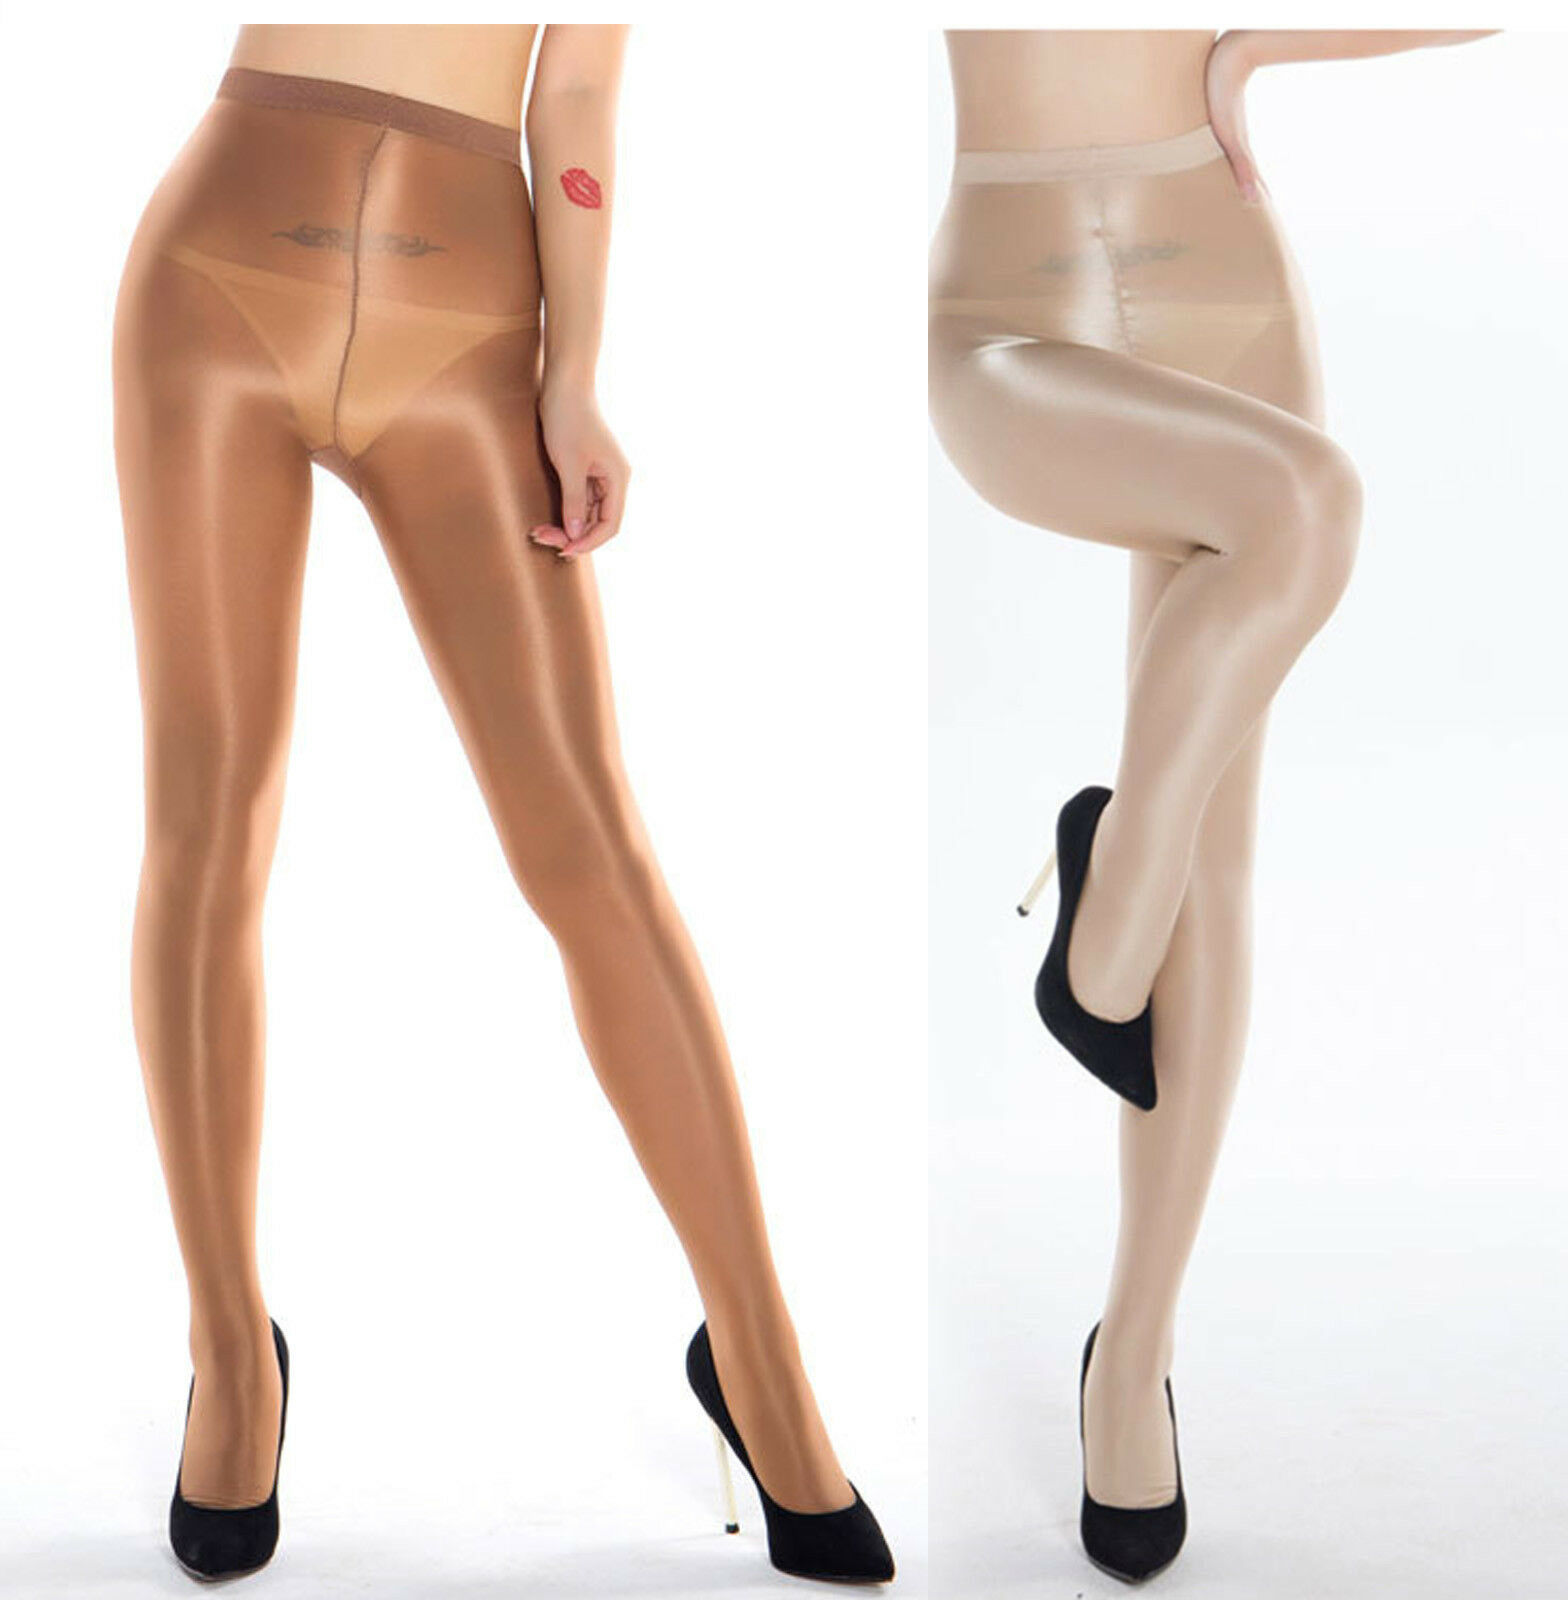 Plus TWO OF 70D Shaping Socks Oil Shiny Silky Stockings Pantyhose Dance Tights